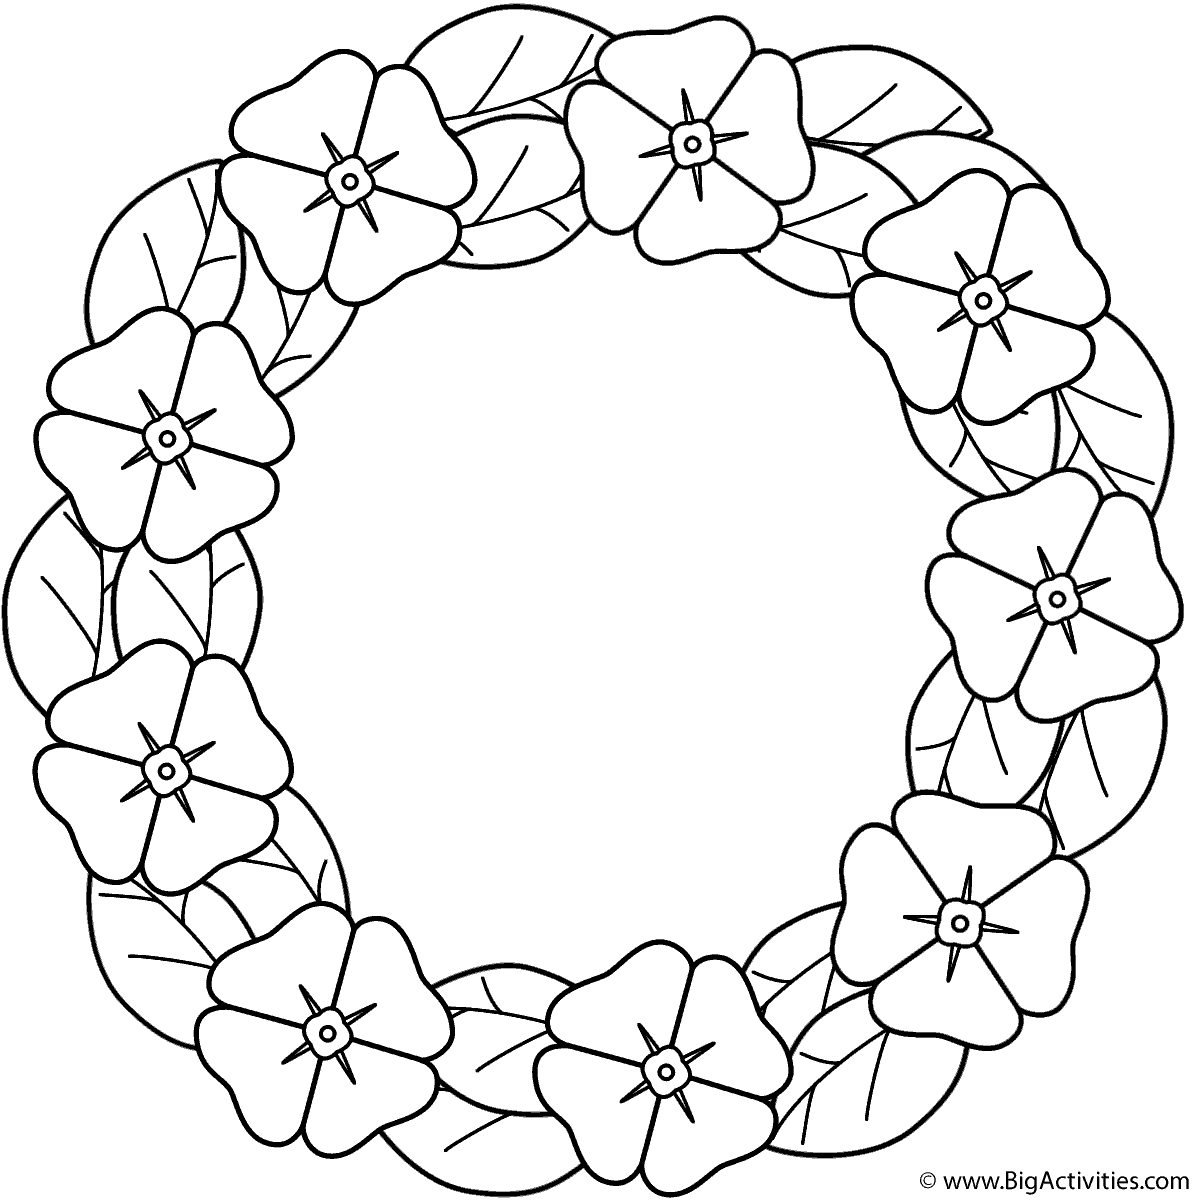 Download Poppy wreath - Coloring Page (Memorial Day)